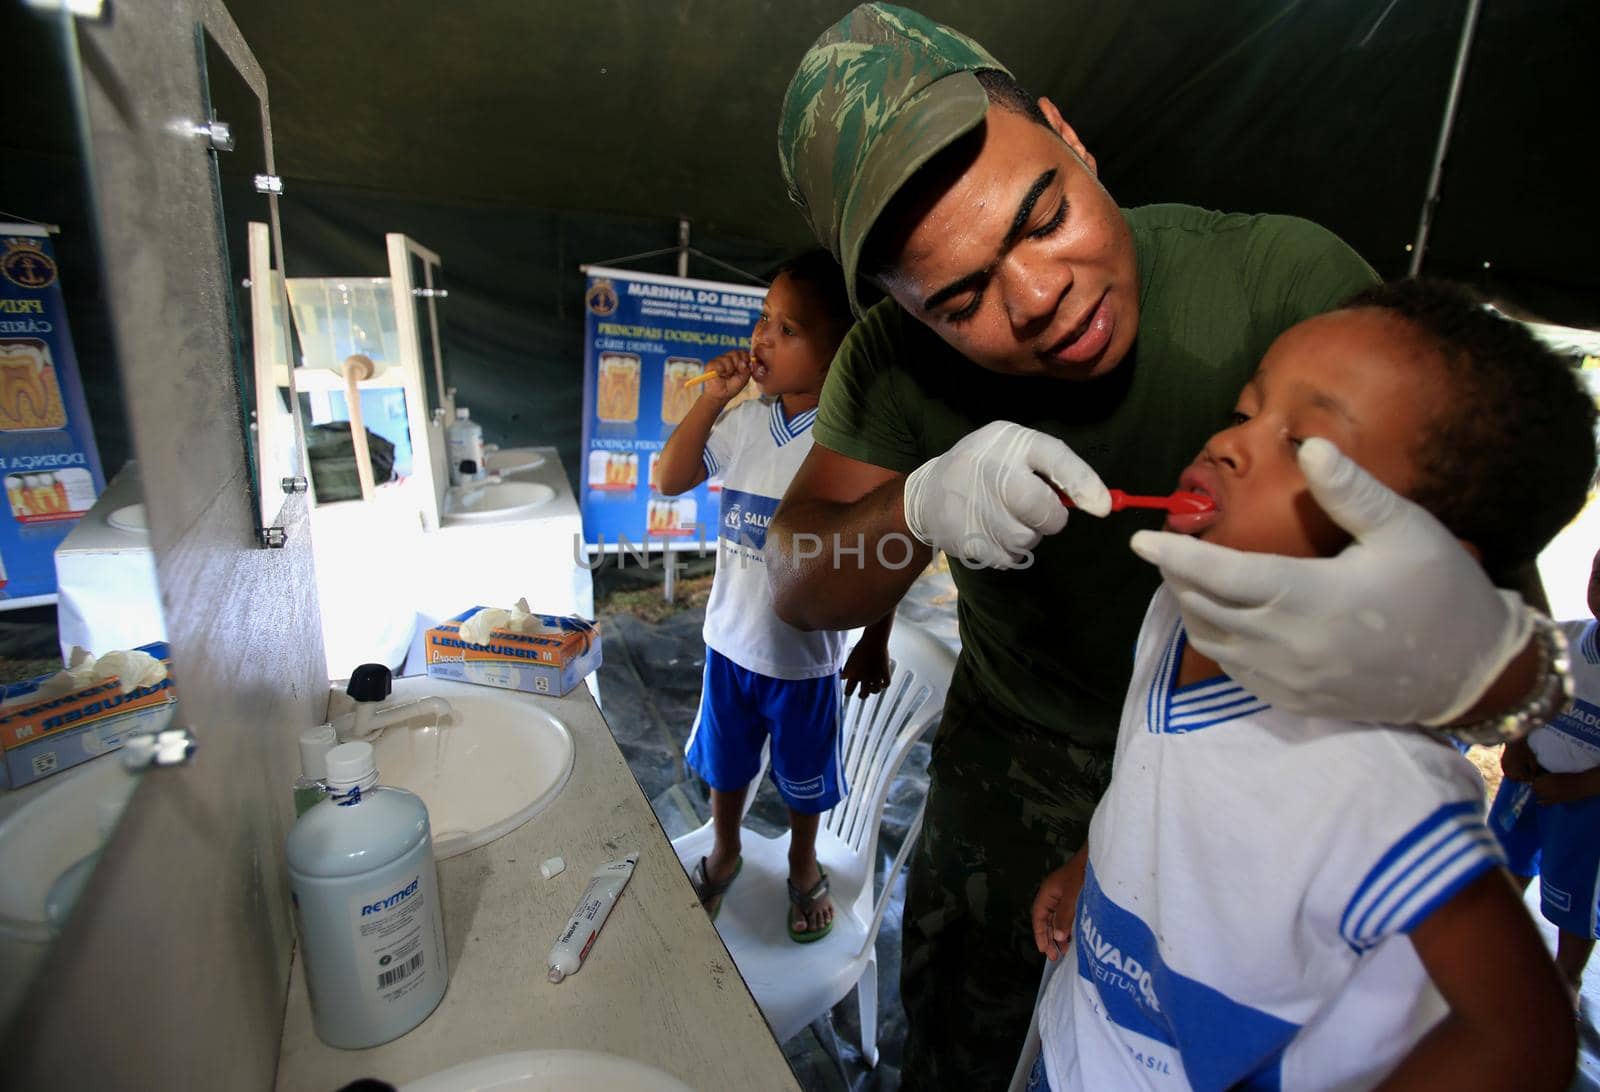 salvador, bahia / brazil - november 4, 2015: military man from the brazilian navy teaches a child to brush his teeth during social action on the island of Mare in the city of Salvador.
